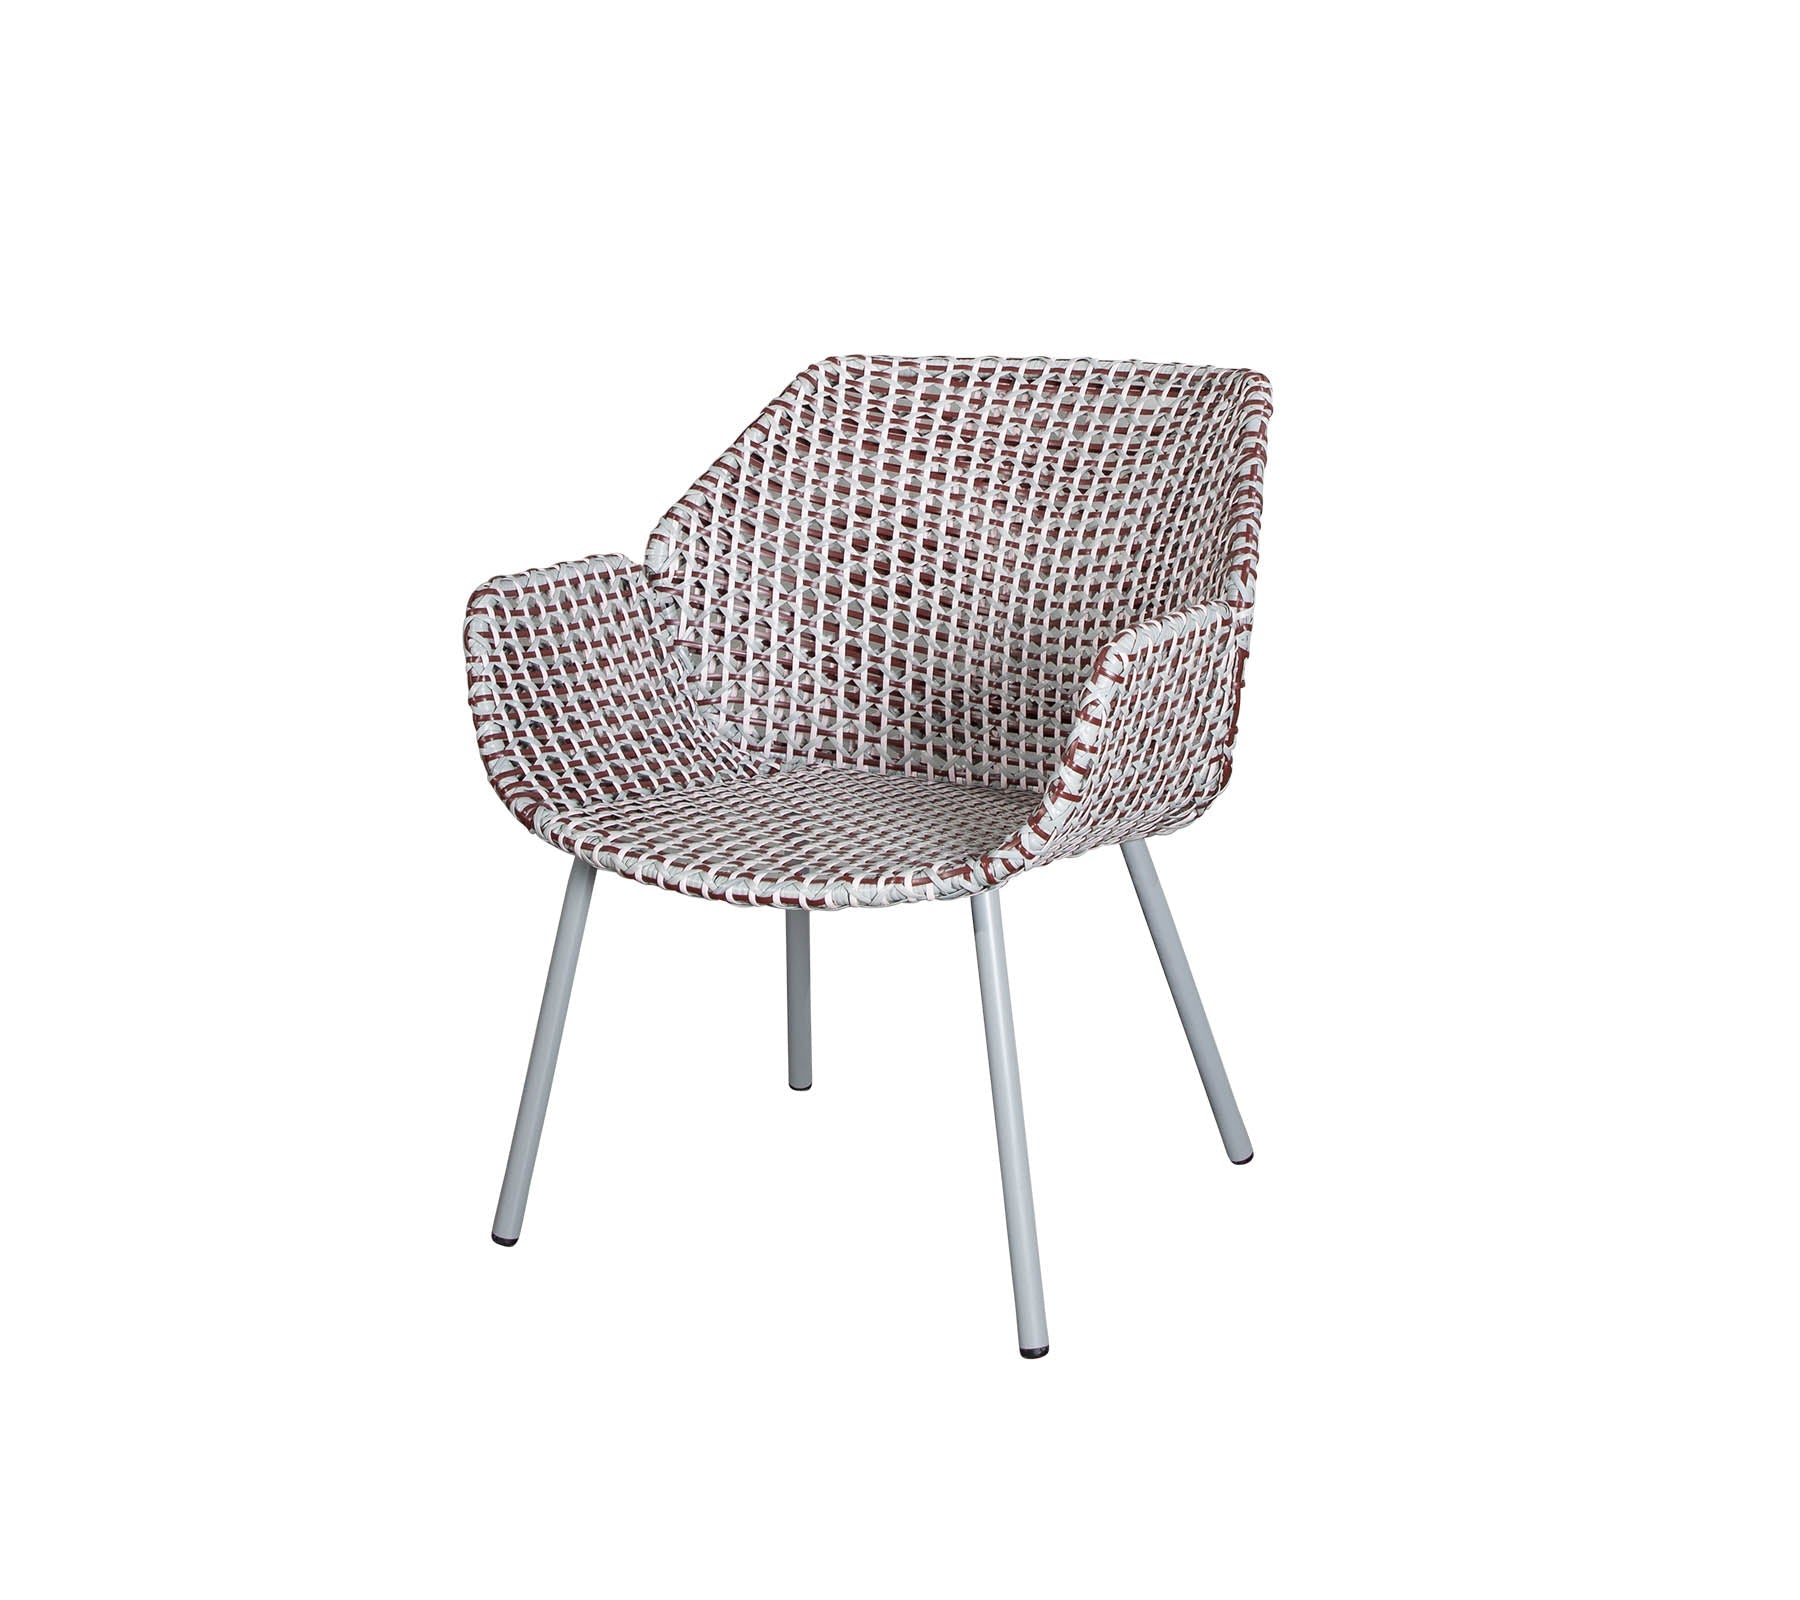 Cane-Line - Vibe lounge chair - Galvanized Steel | 5407